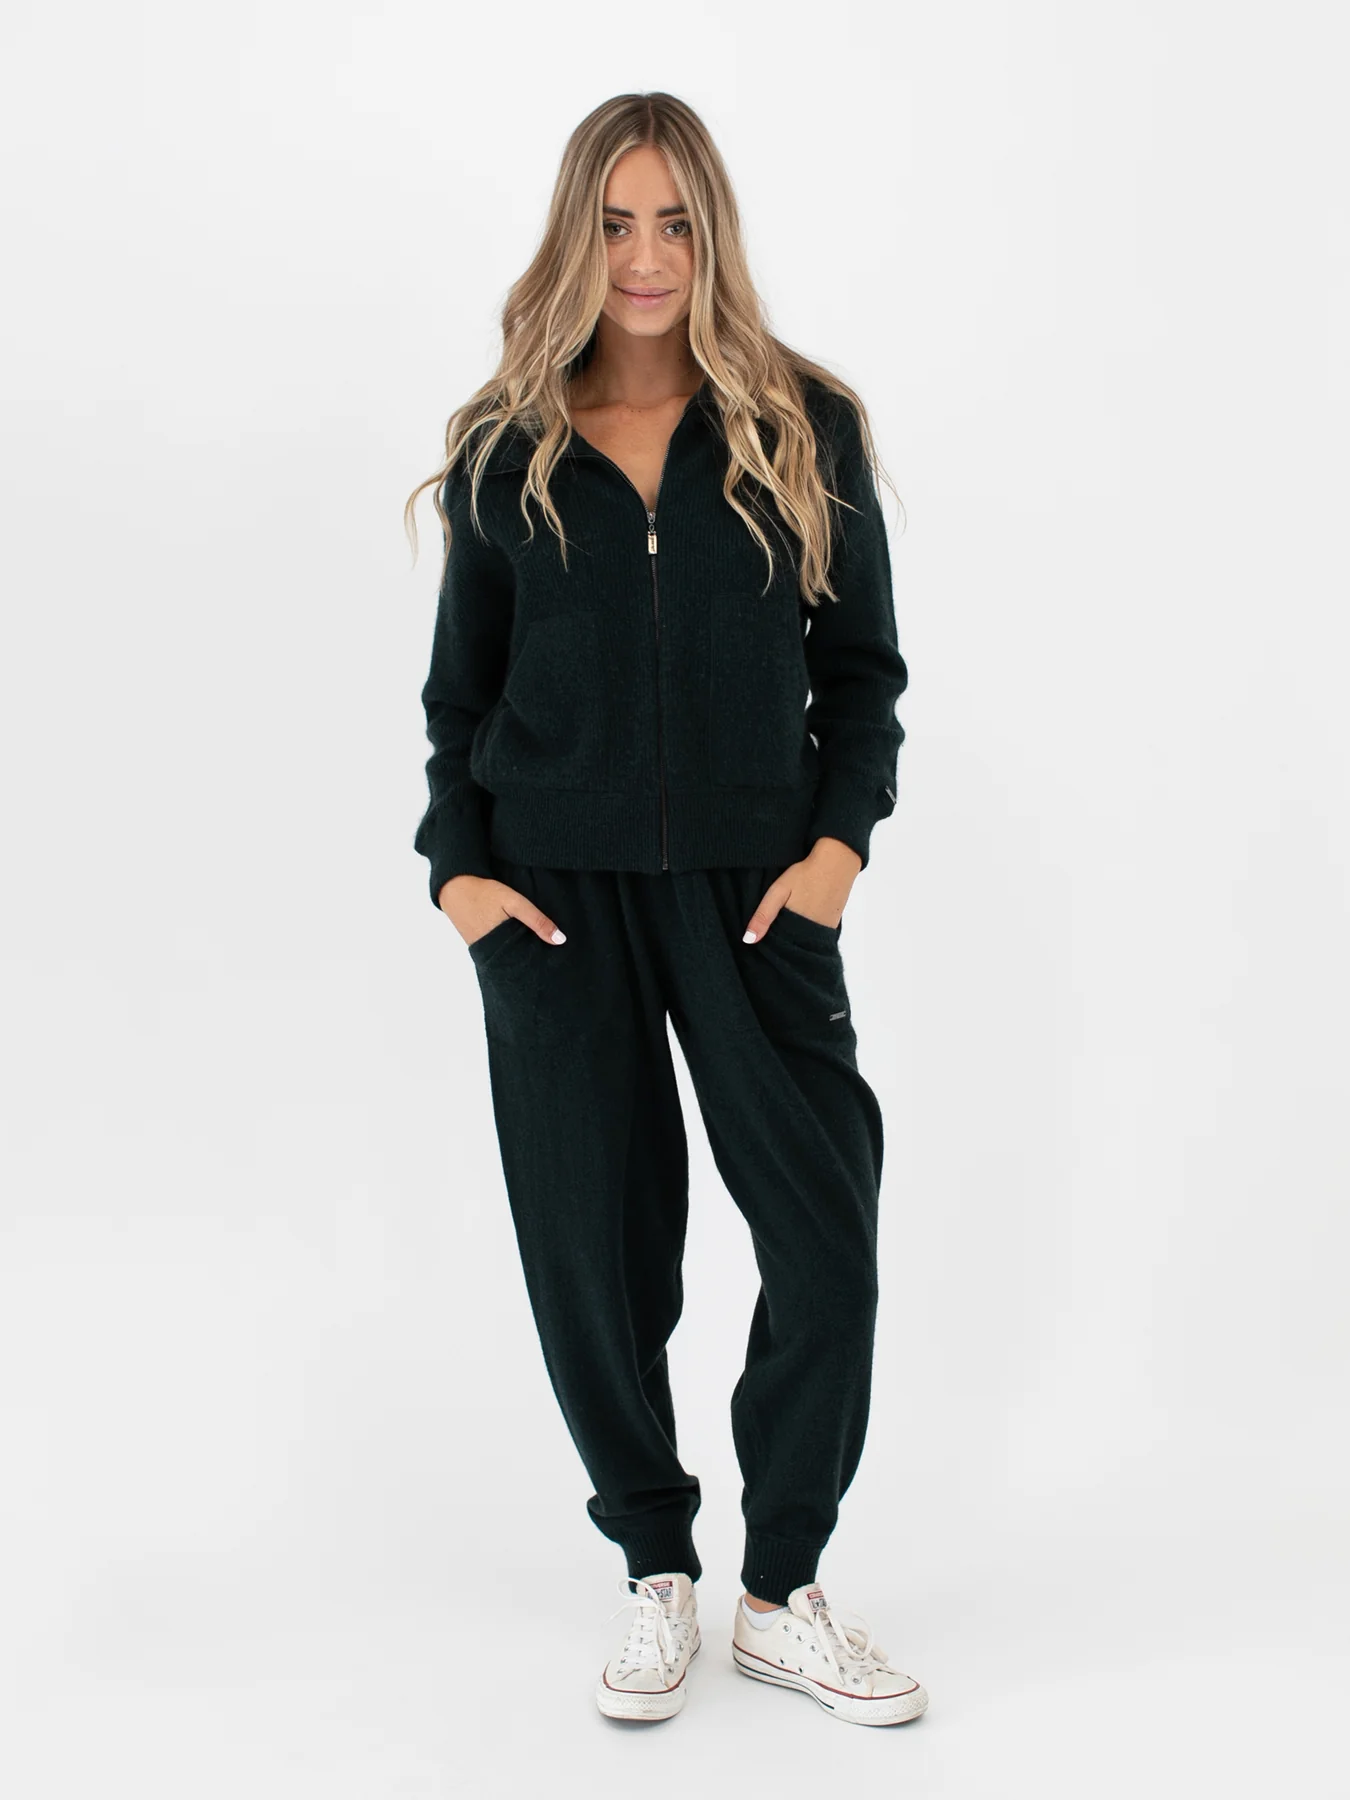 Embrace Comfort and Style: Joggers for Women